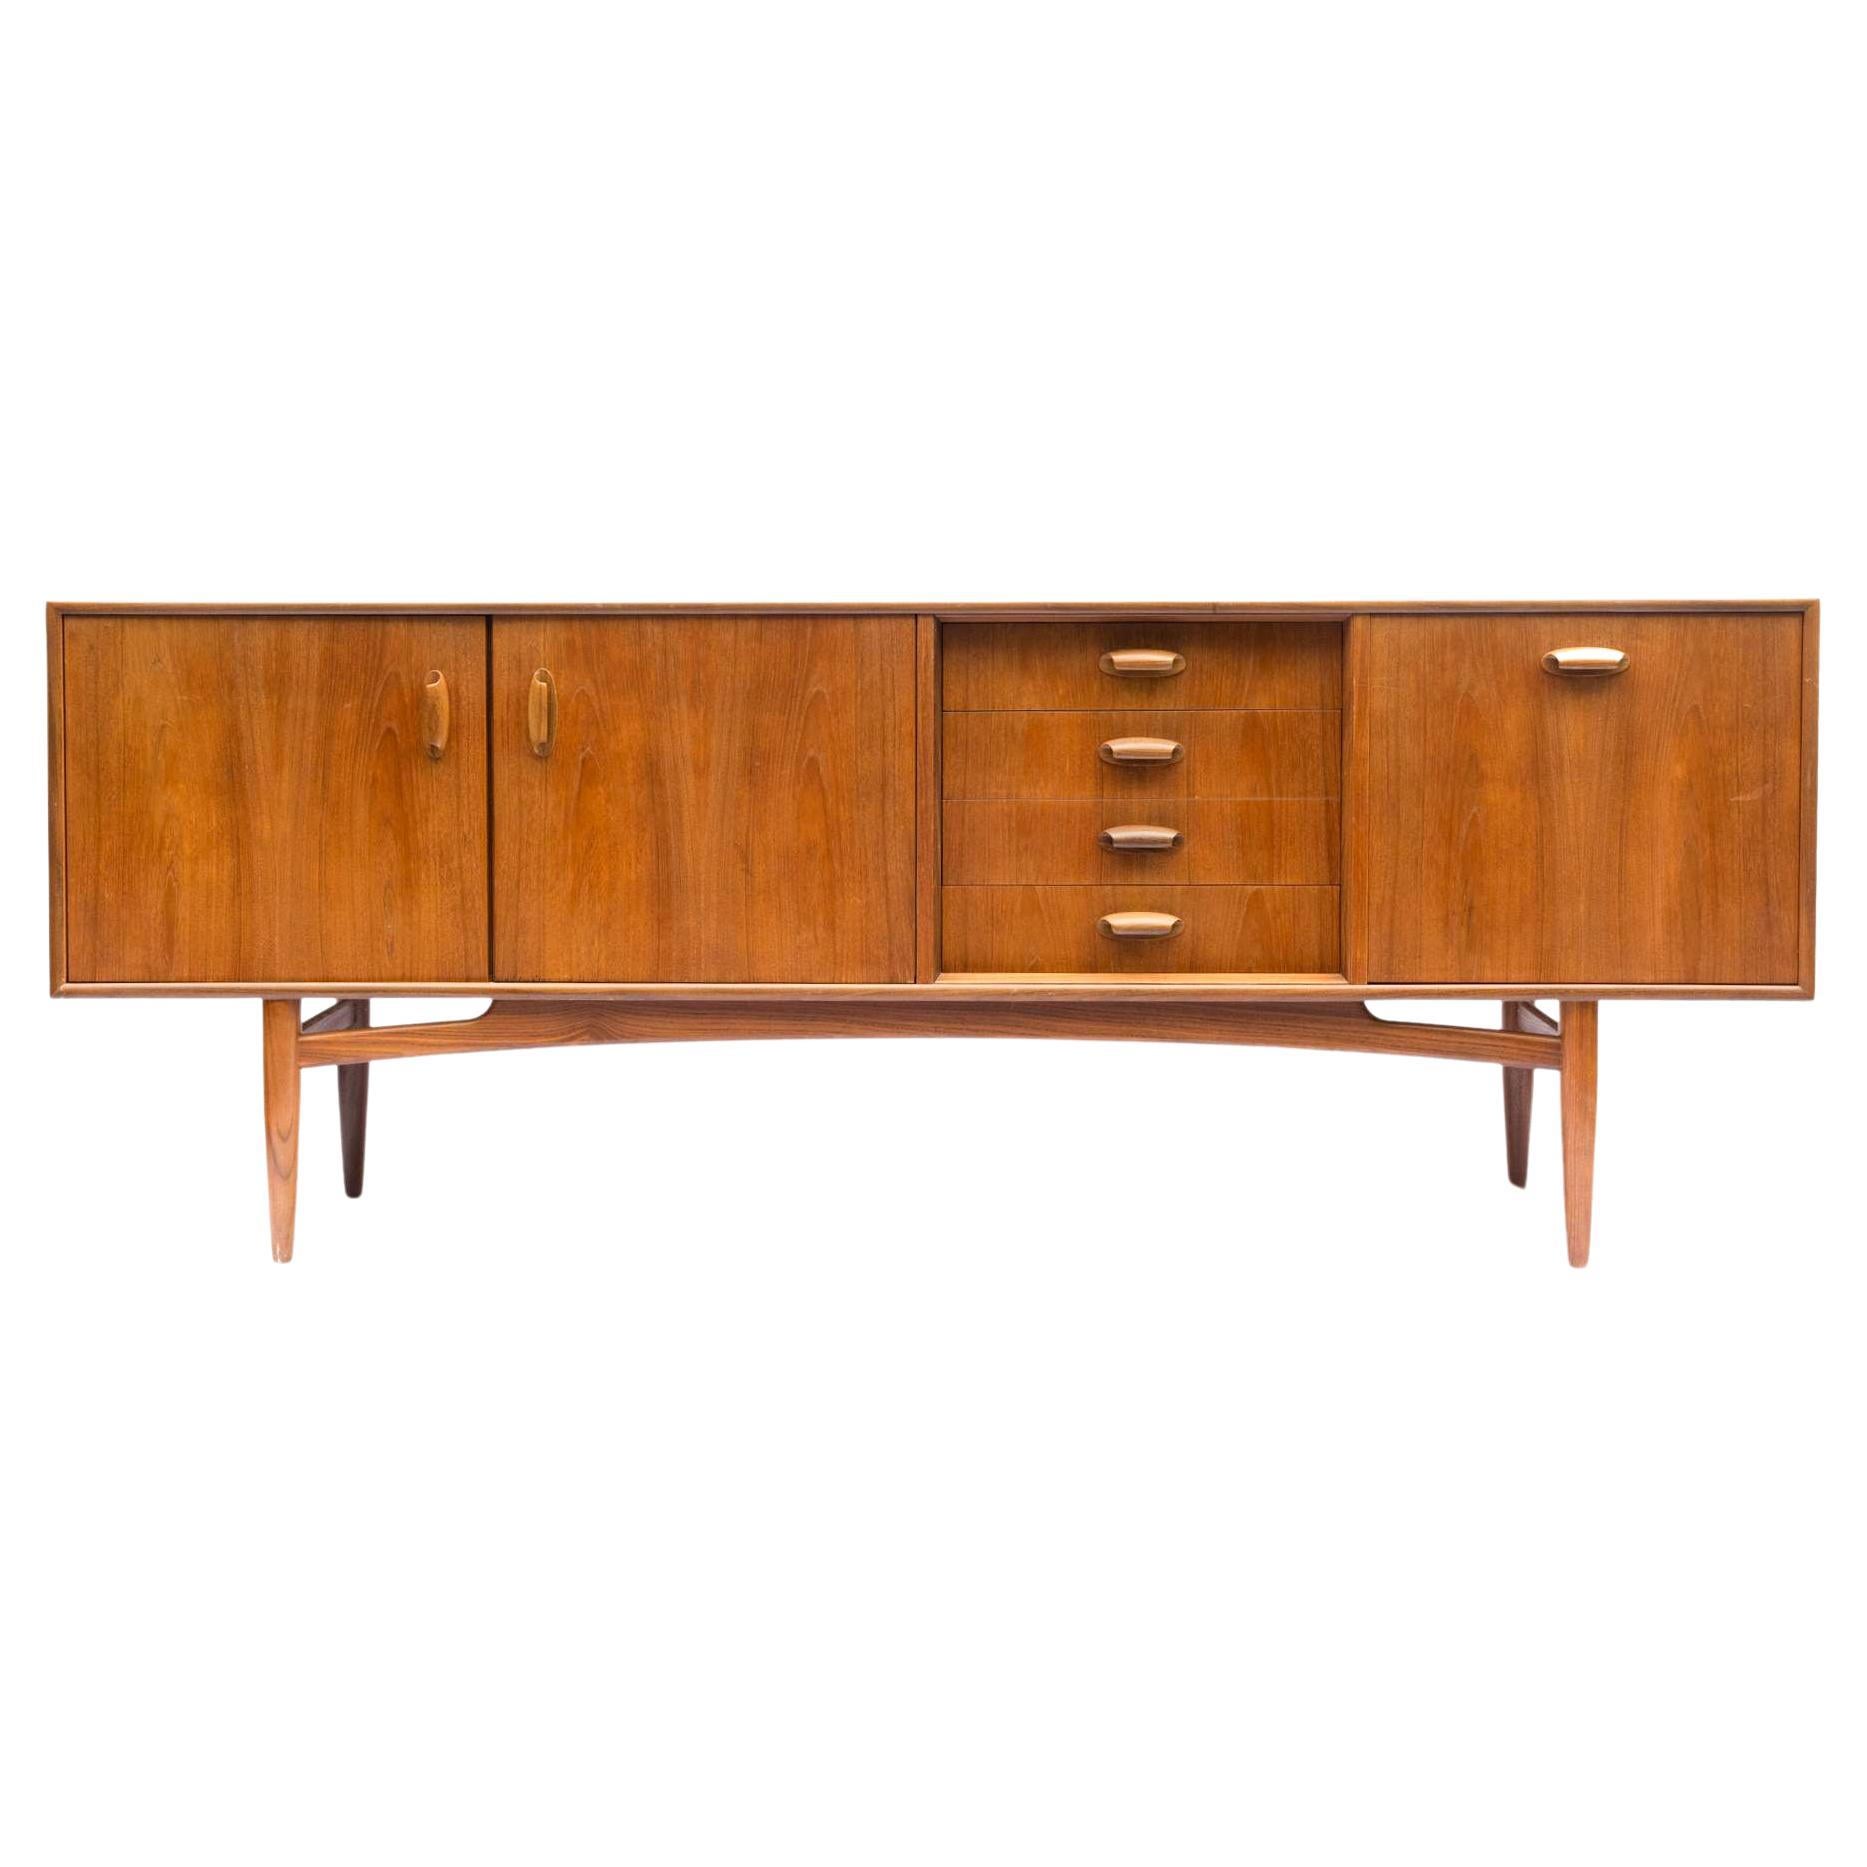 Mid-Century Modern Teak Sideboard with Drinks Cabinet, Signed G-Plan, circa 1960